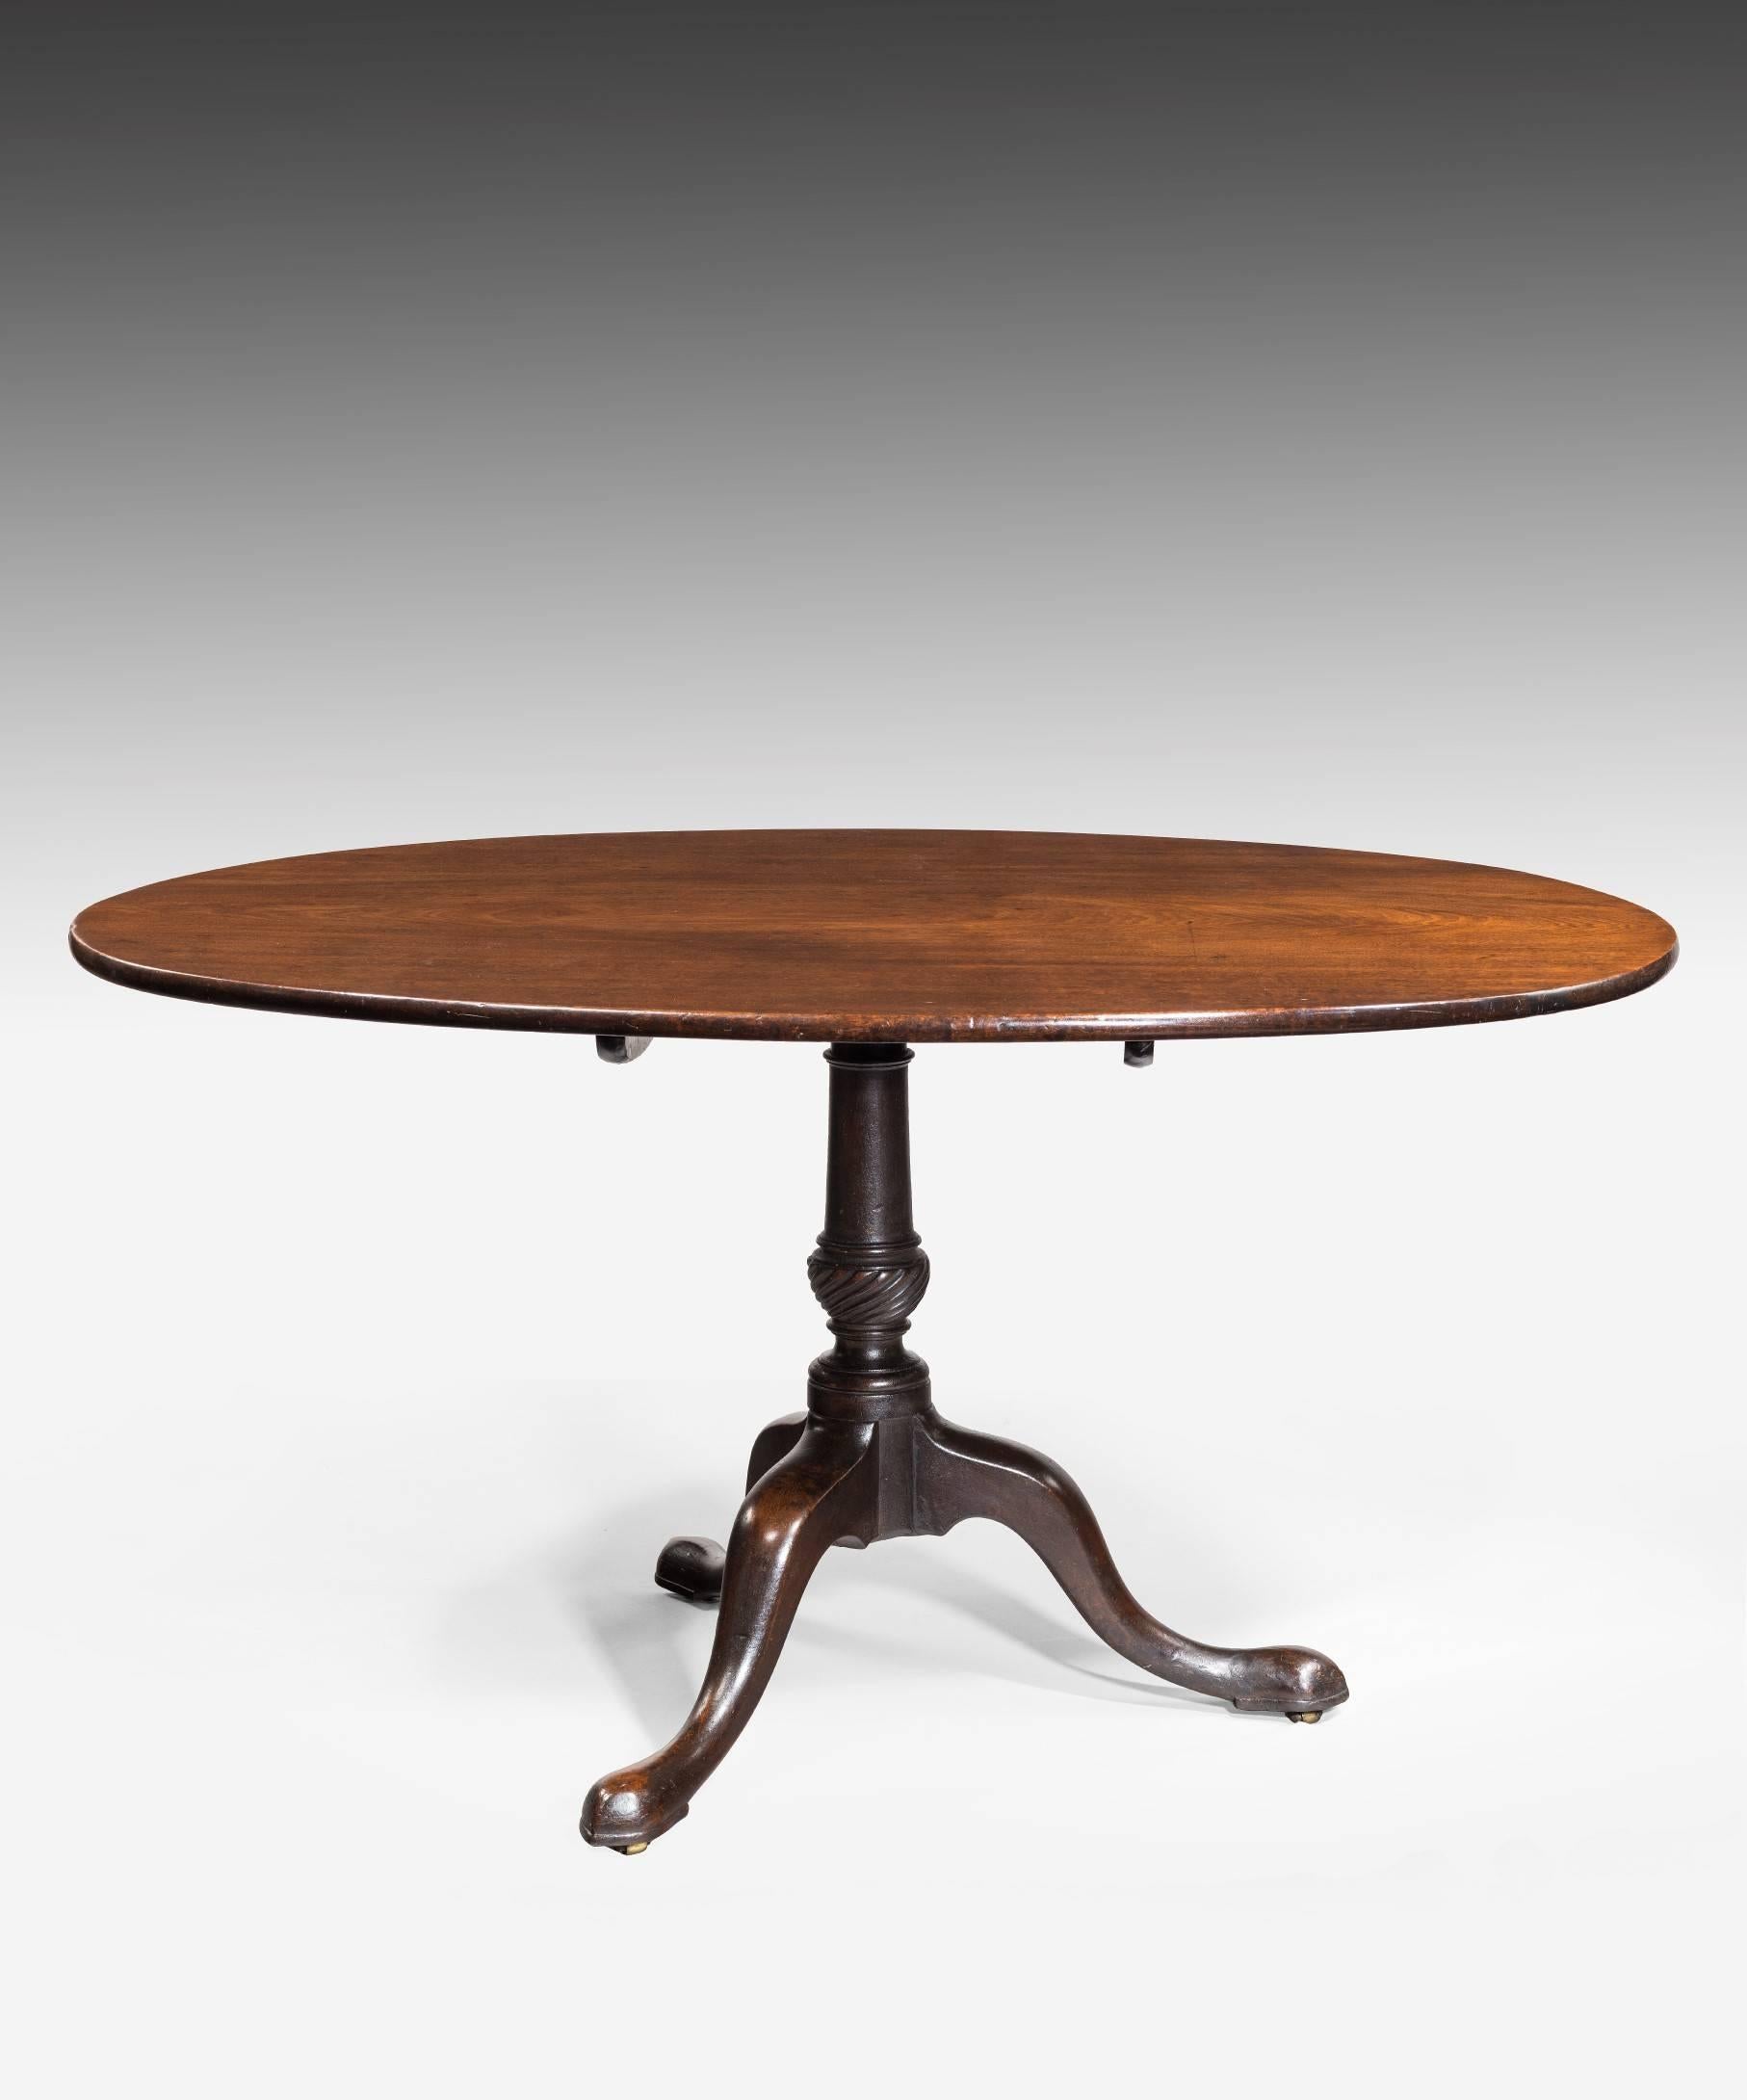 A large George II period mahogany oval supper centre table; the table's well figured tilt-top above a wrythen turned stem and raised on handsome cabriole legs terminating in pad feet.

This Georgian table is the ideal size for a supper table to